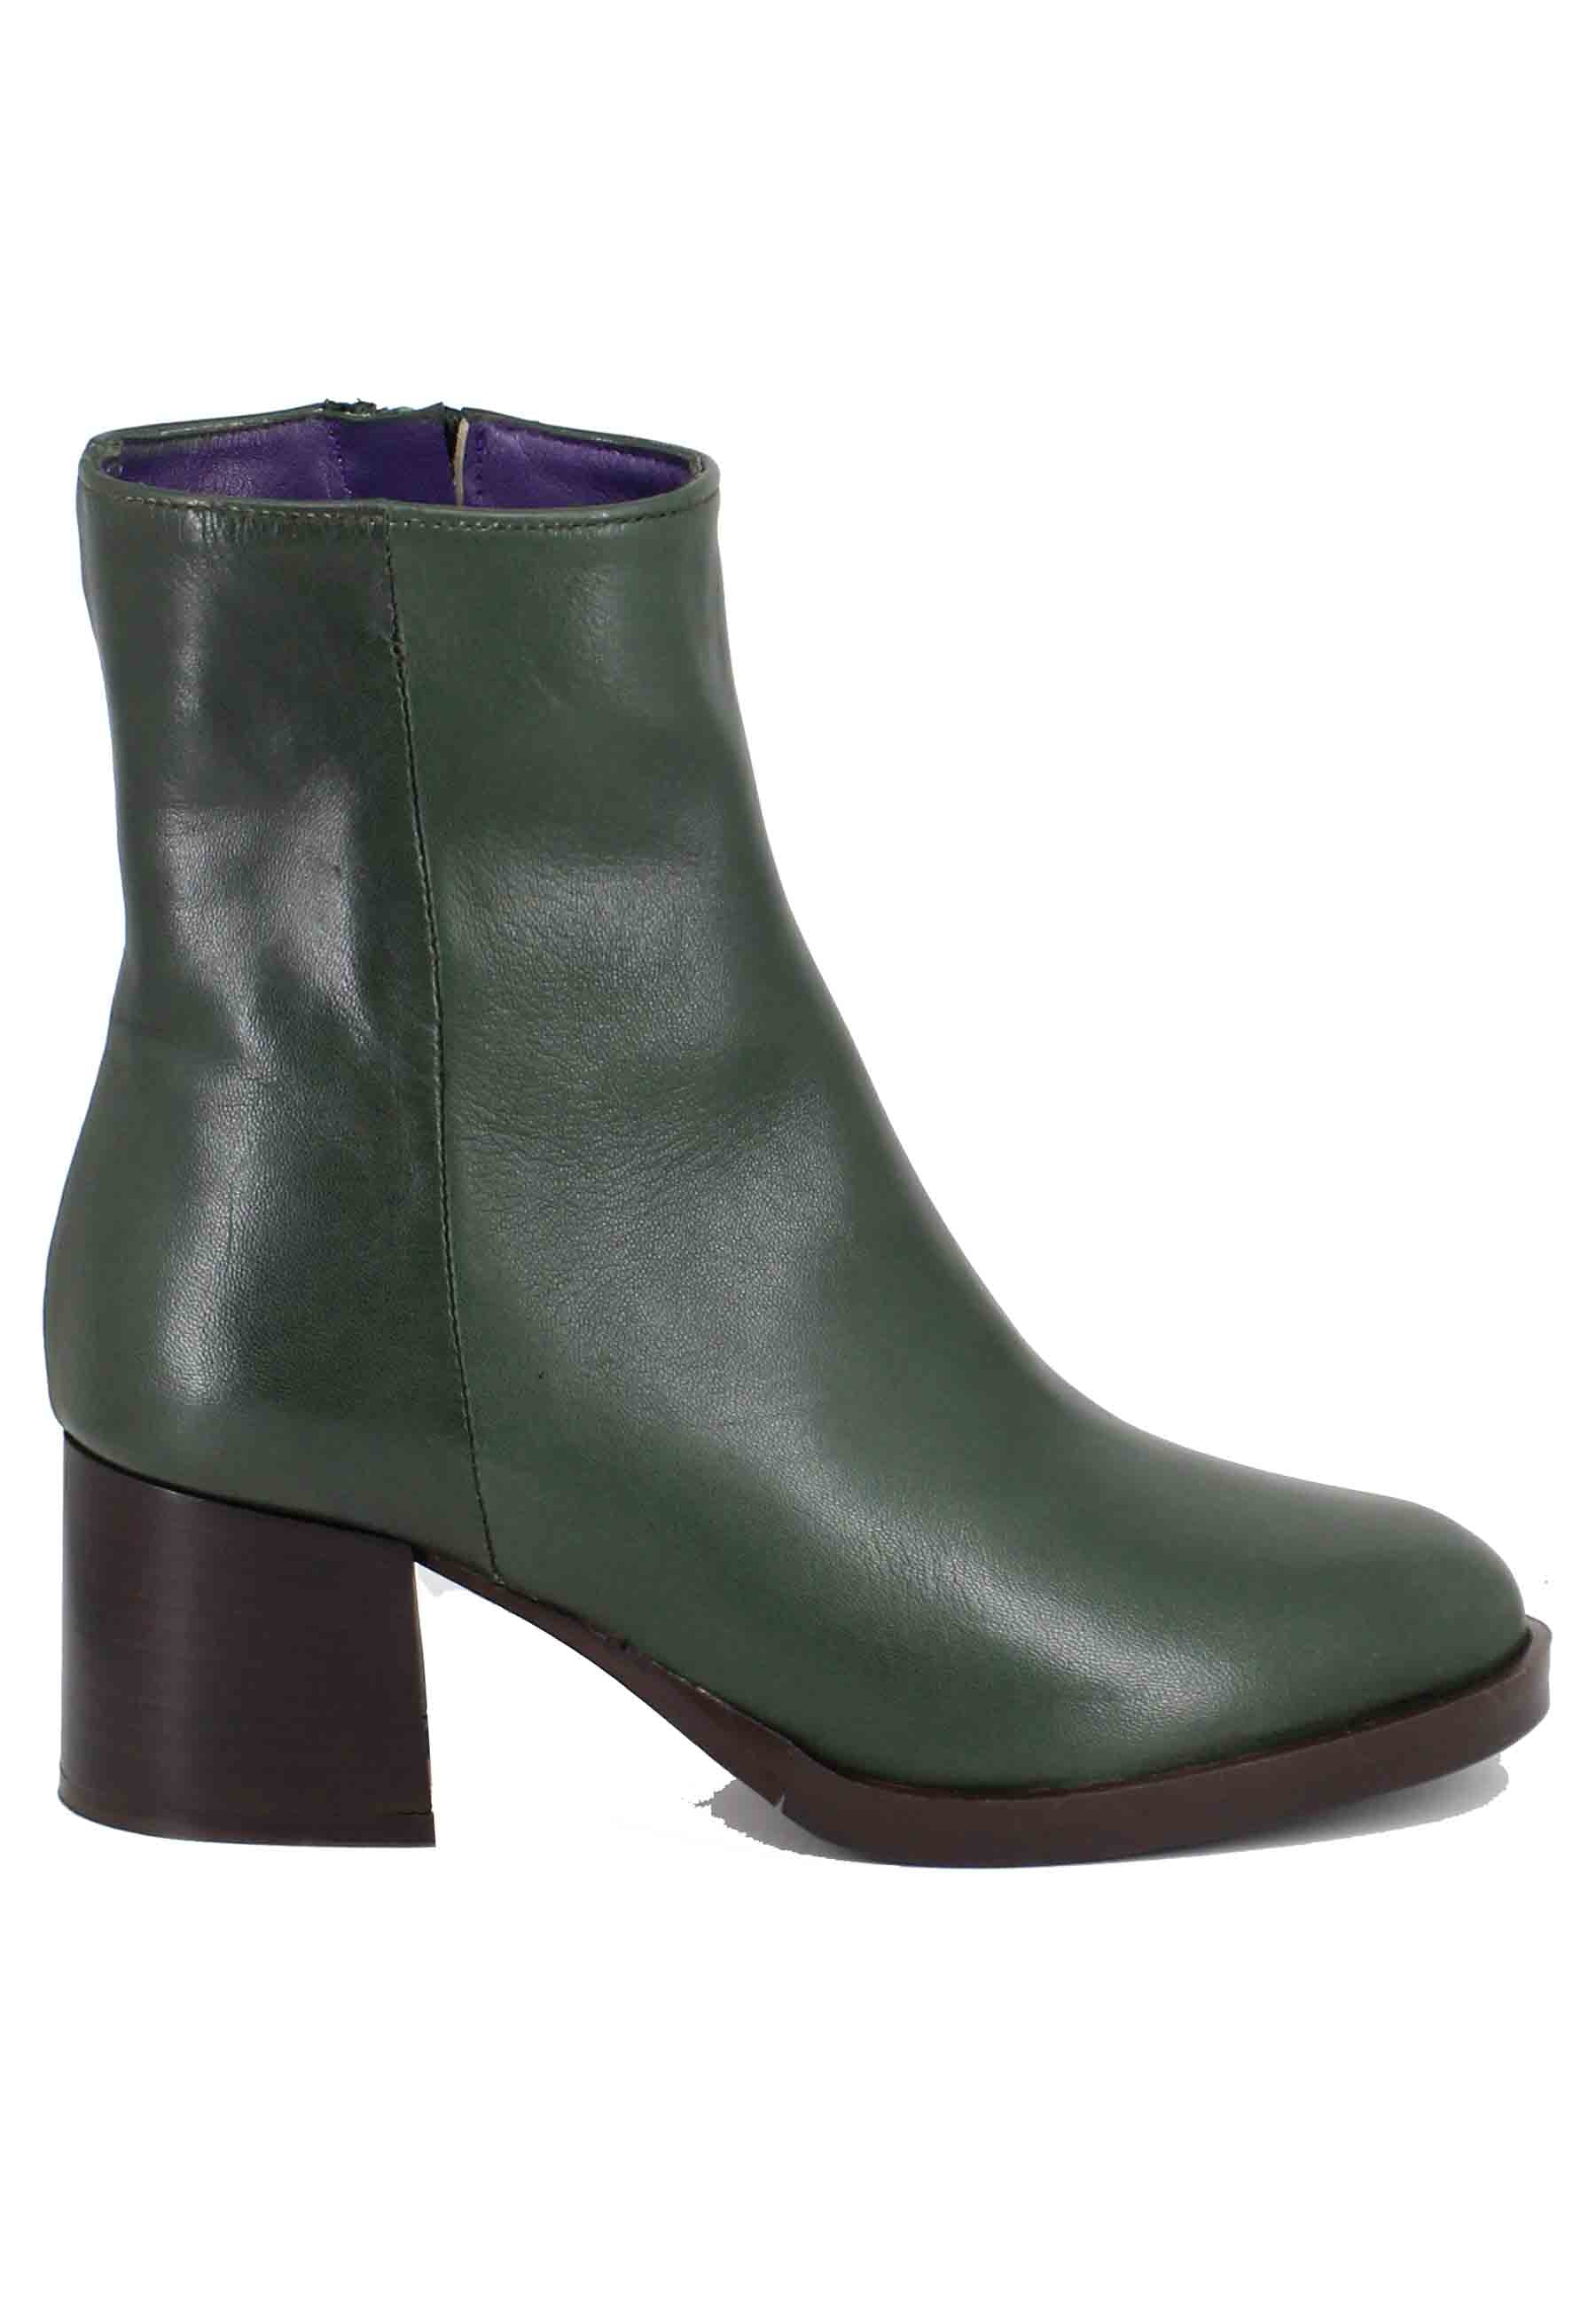 Women's low heel green leather ankle boots